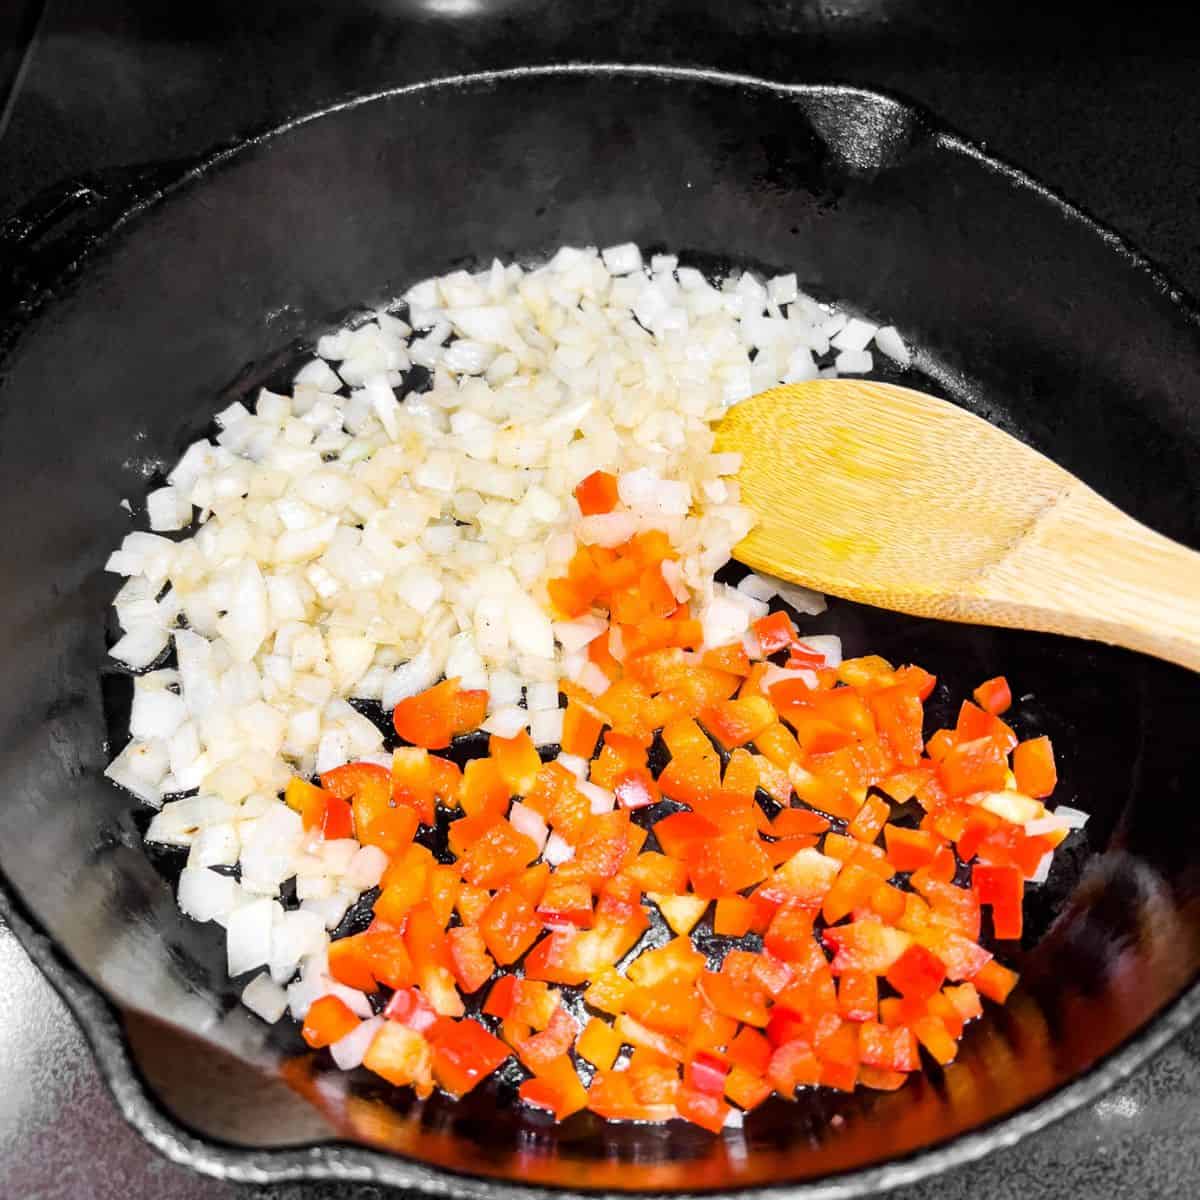 Cooking onion and bell pepper in a skillet.